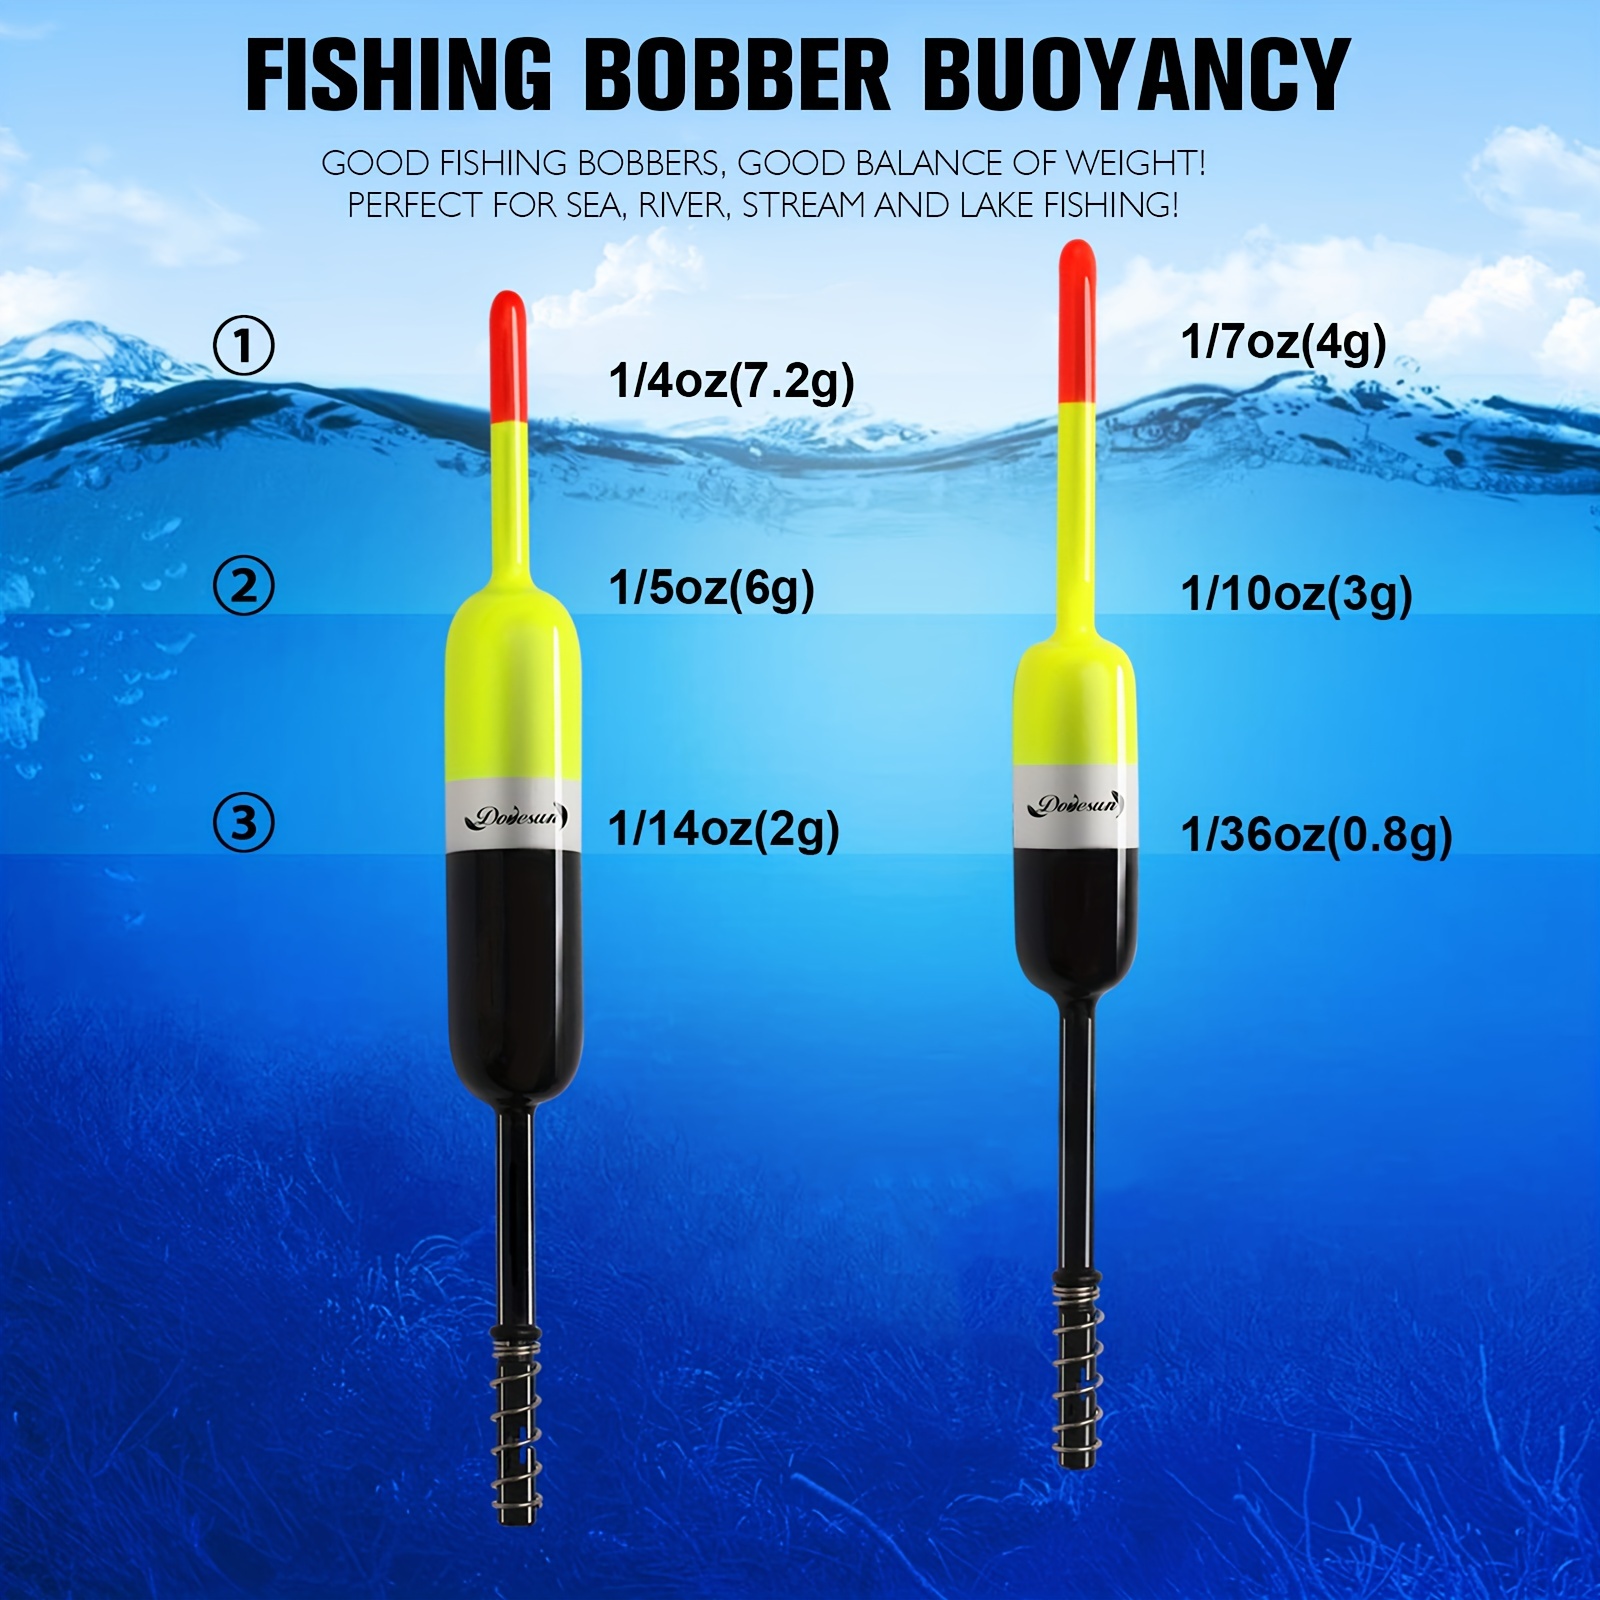 This is Best Night Fishing Bobber Accessory! 